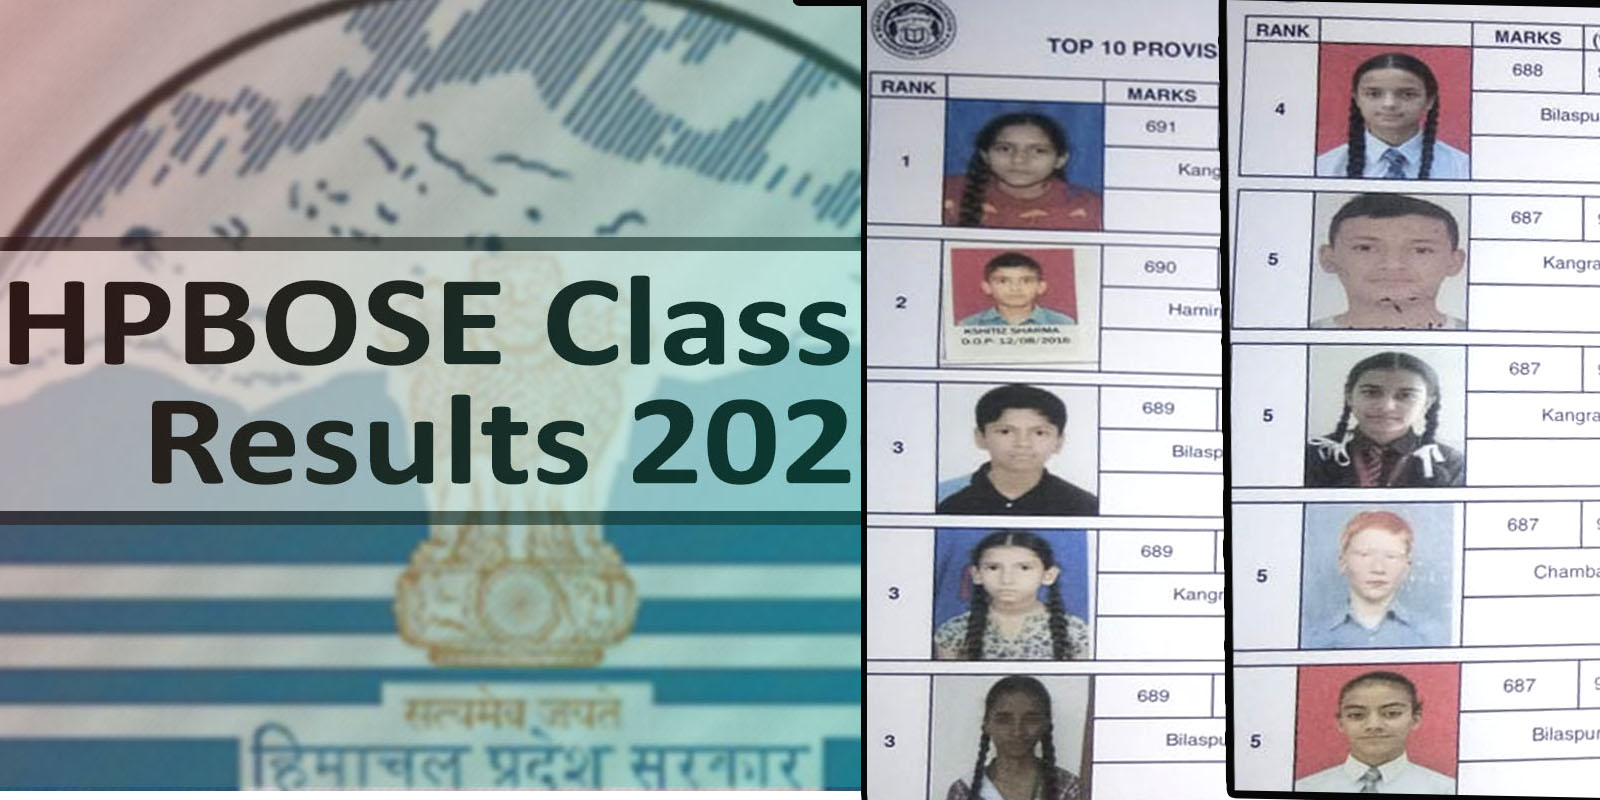 HPBOSE Class 10th Results 2020 declared